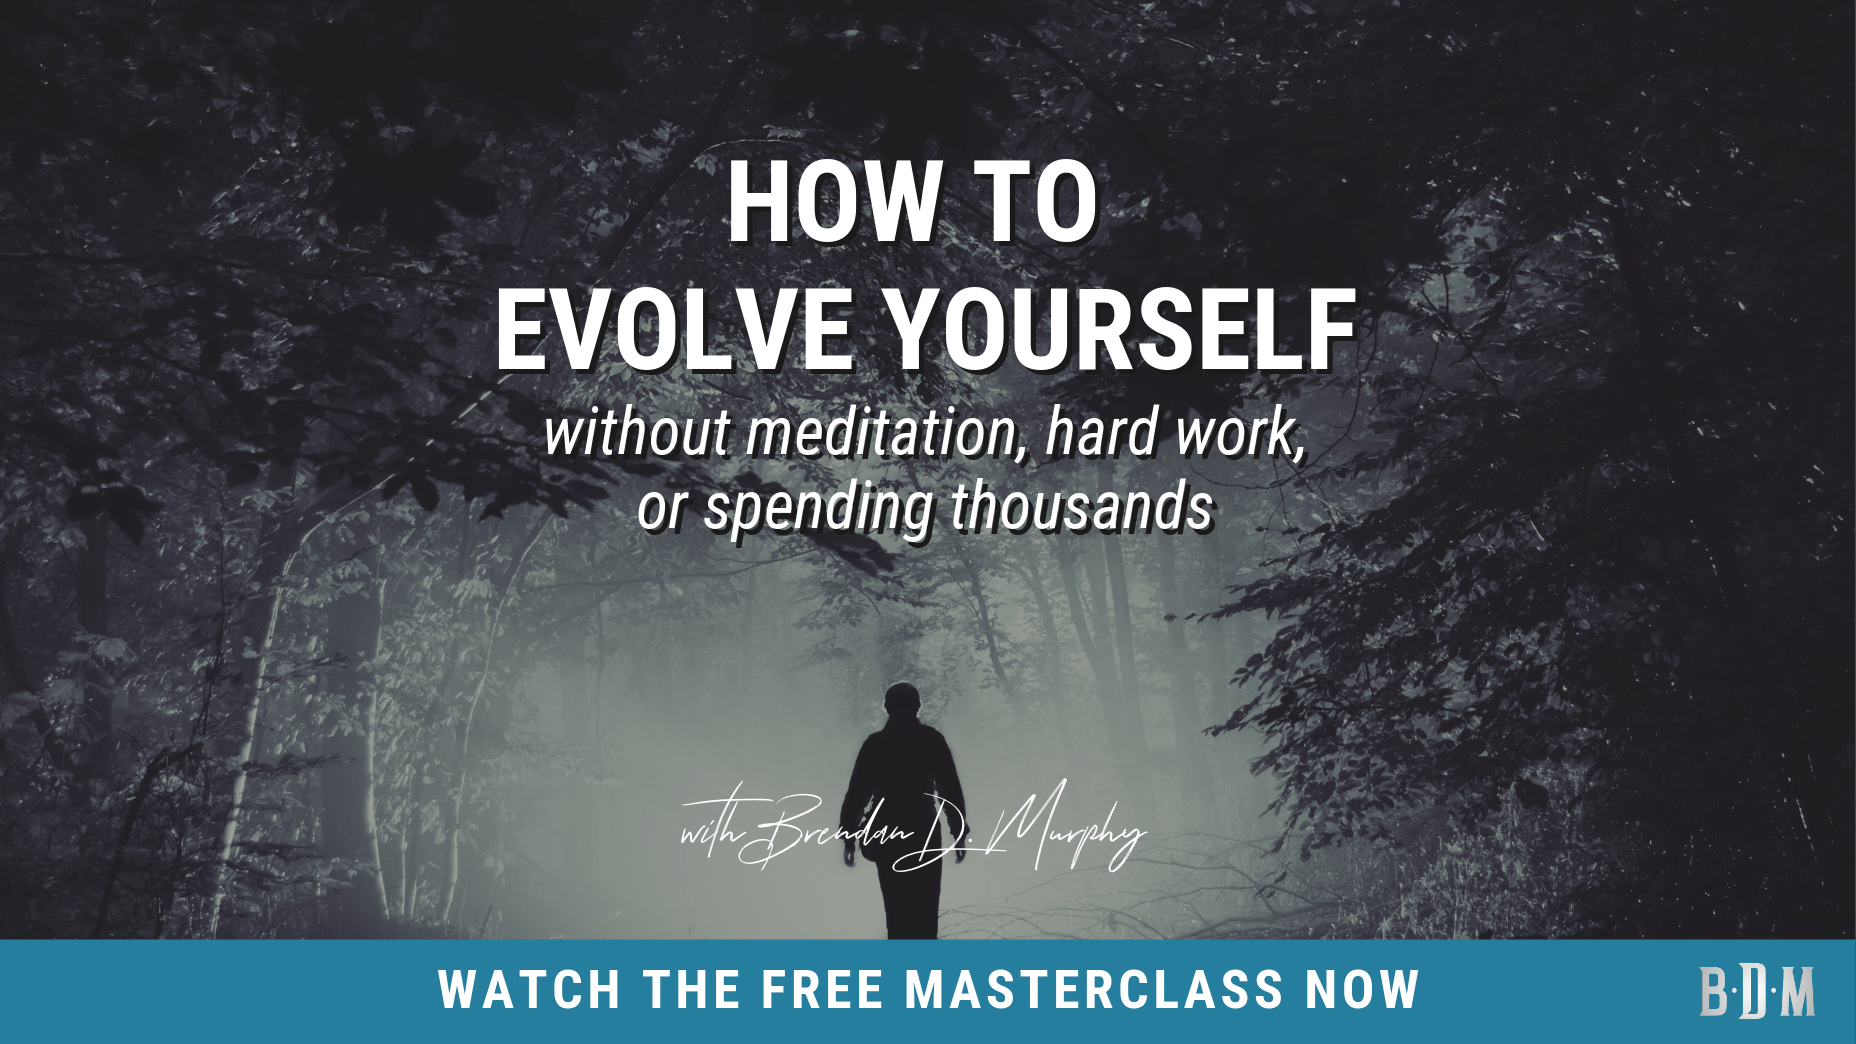 https://brendandmurphy.com/wp-content/uploads/2019/09/How-to-Evolve-Yourself-banner-for-article.png